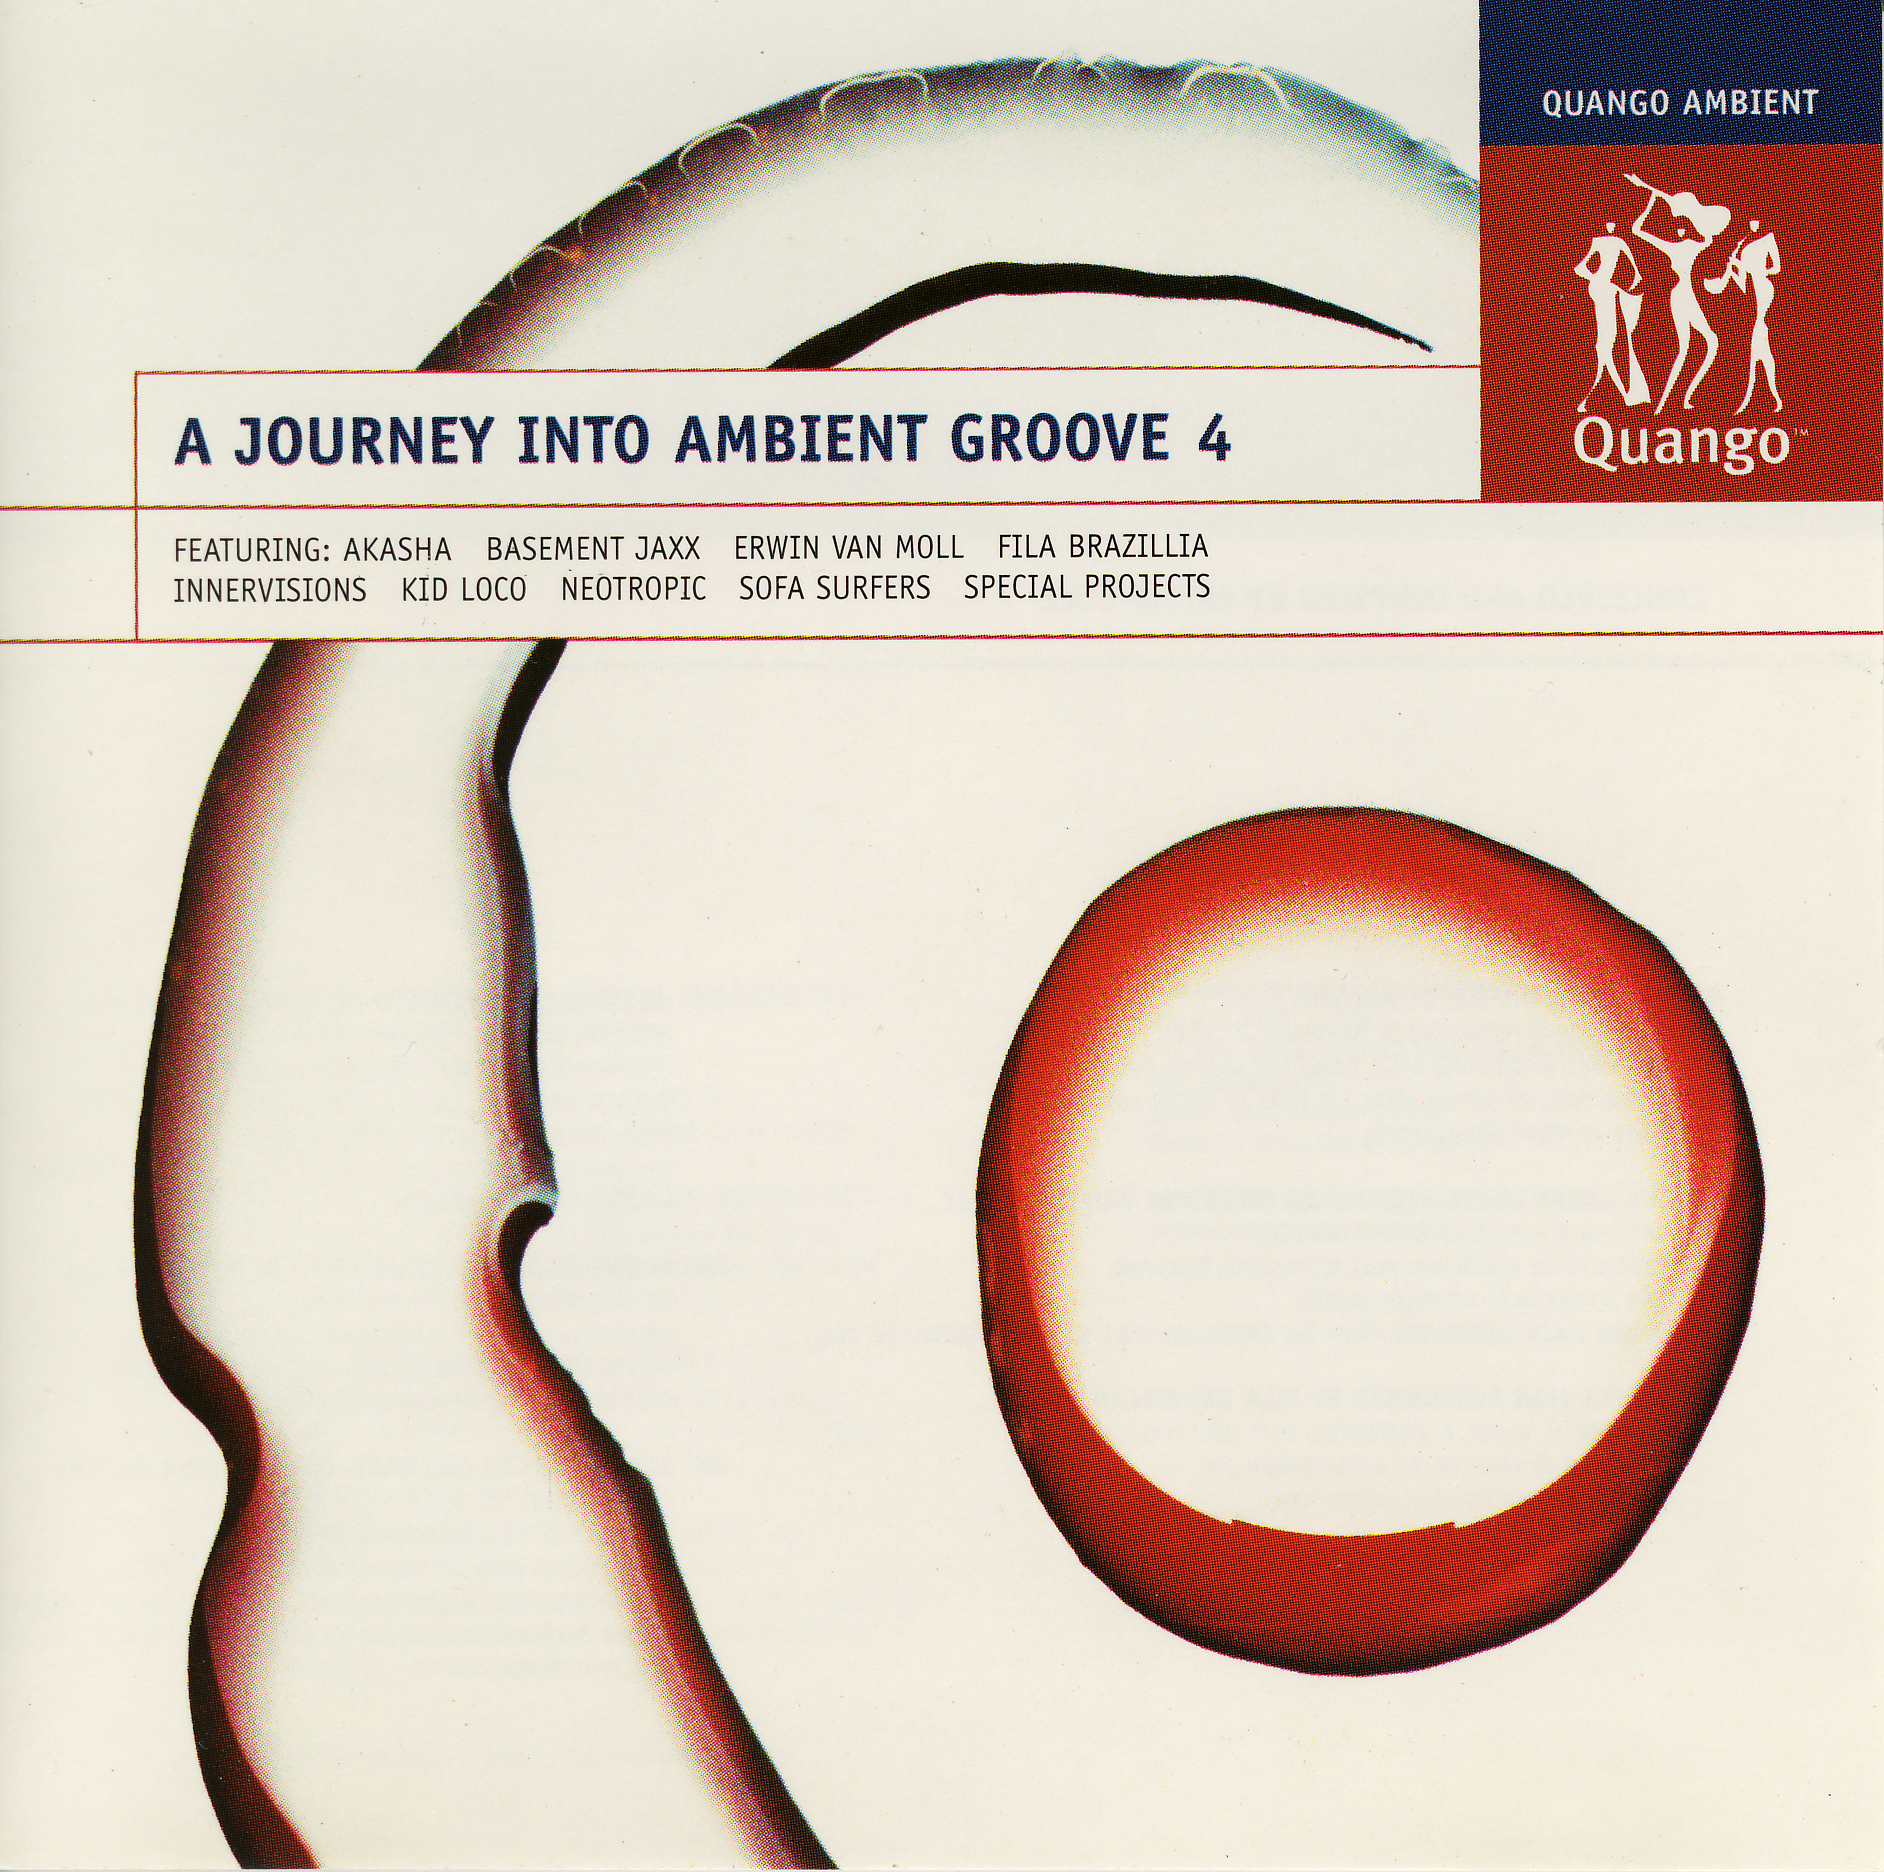 A-Journey-Into-Ambient-Groove-4.jpg